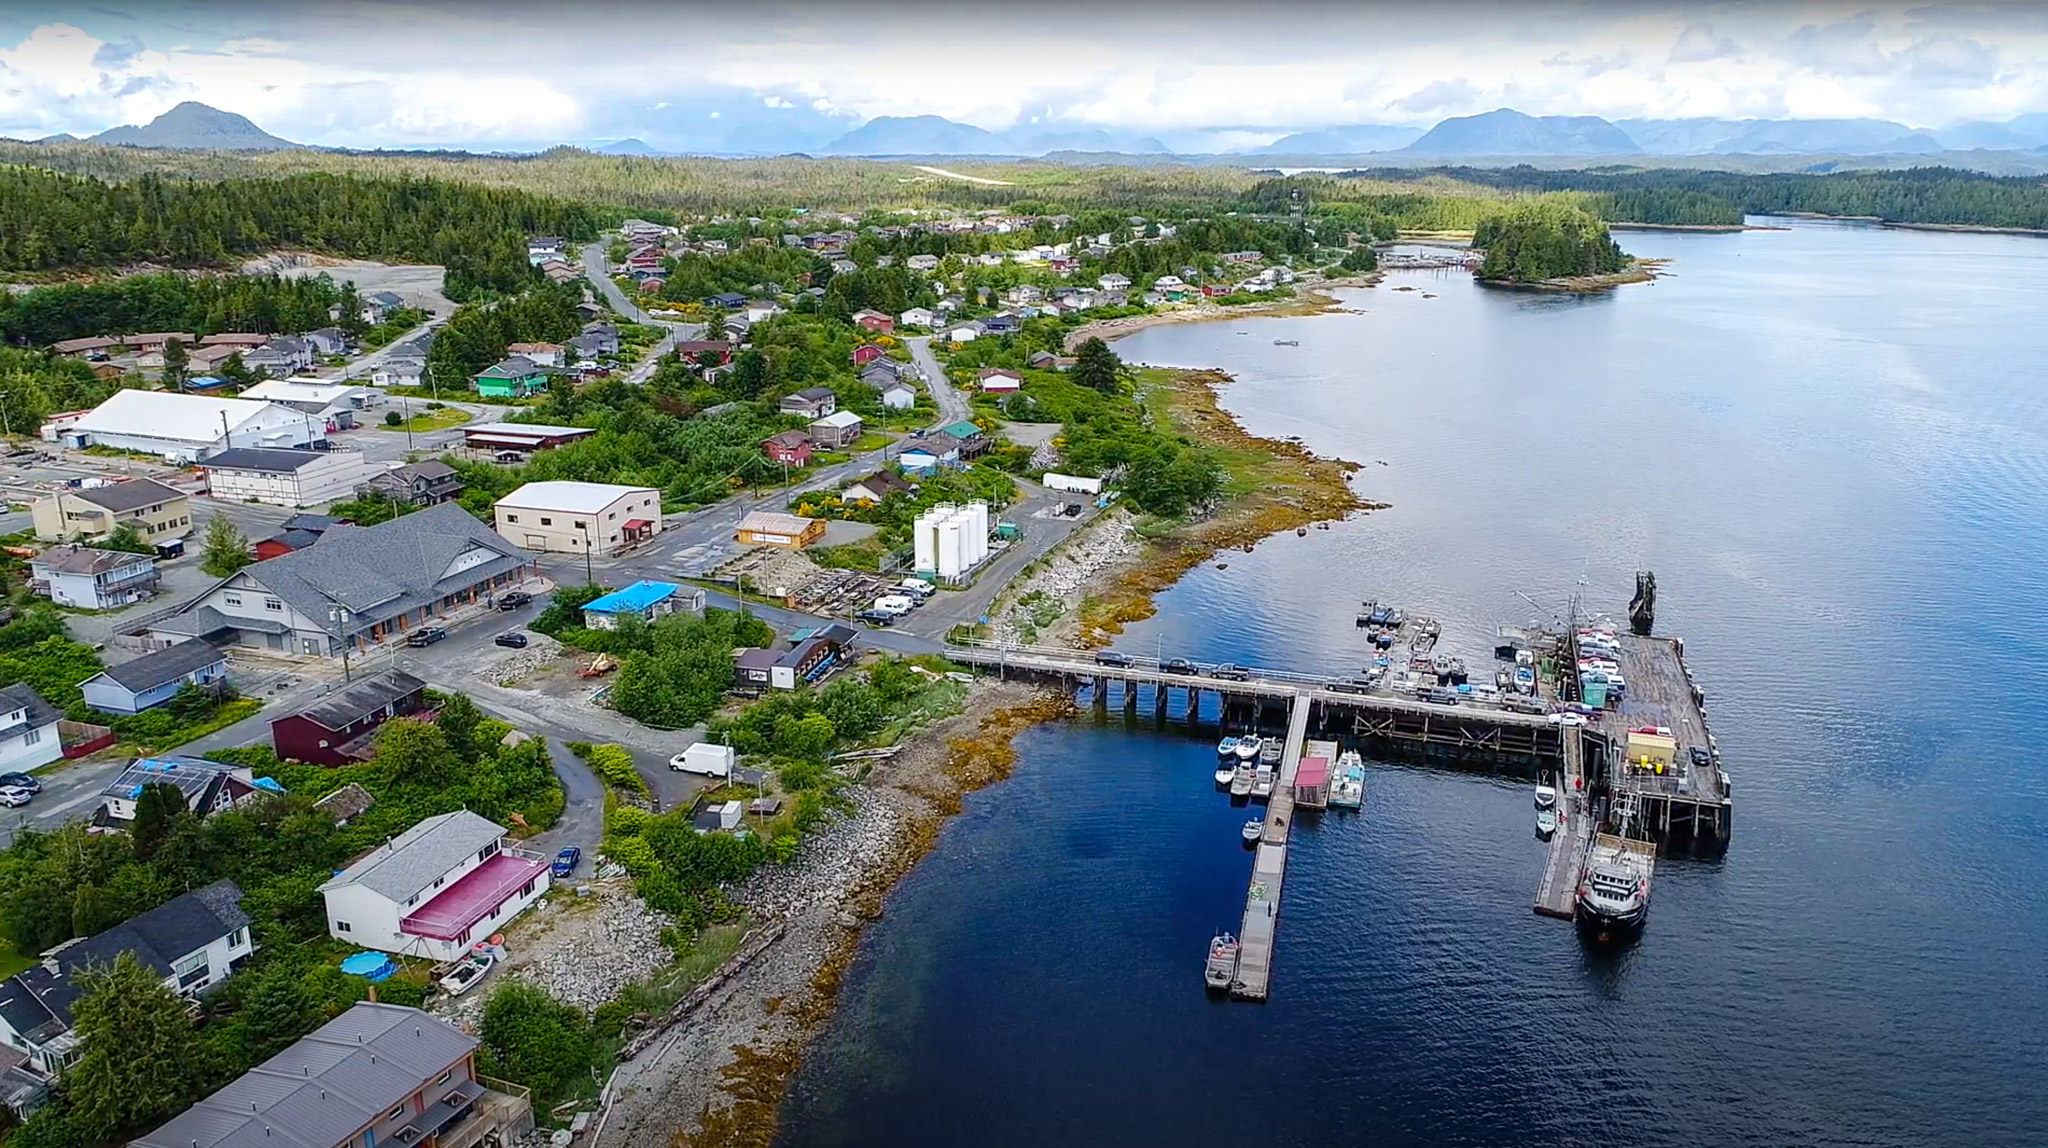 An aerial view of the town of Bella Bella, showing buildings and a dock into the ocean as well as forest and mountains in the background